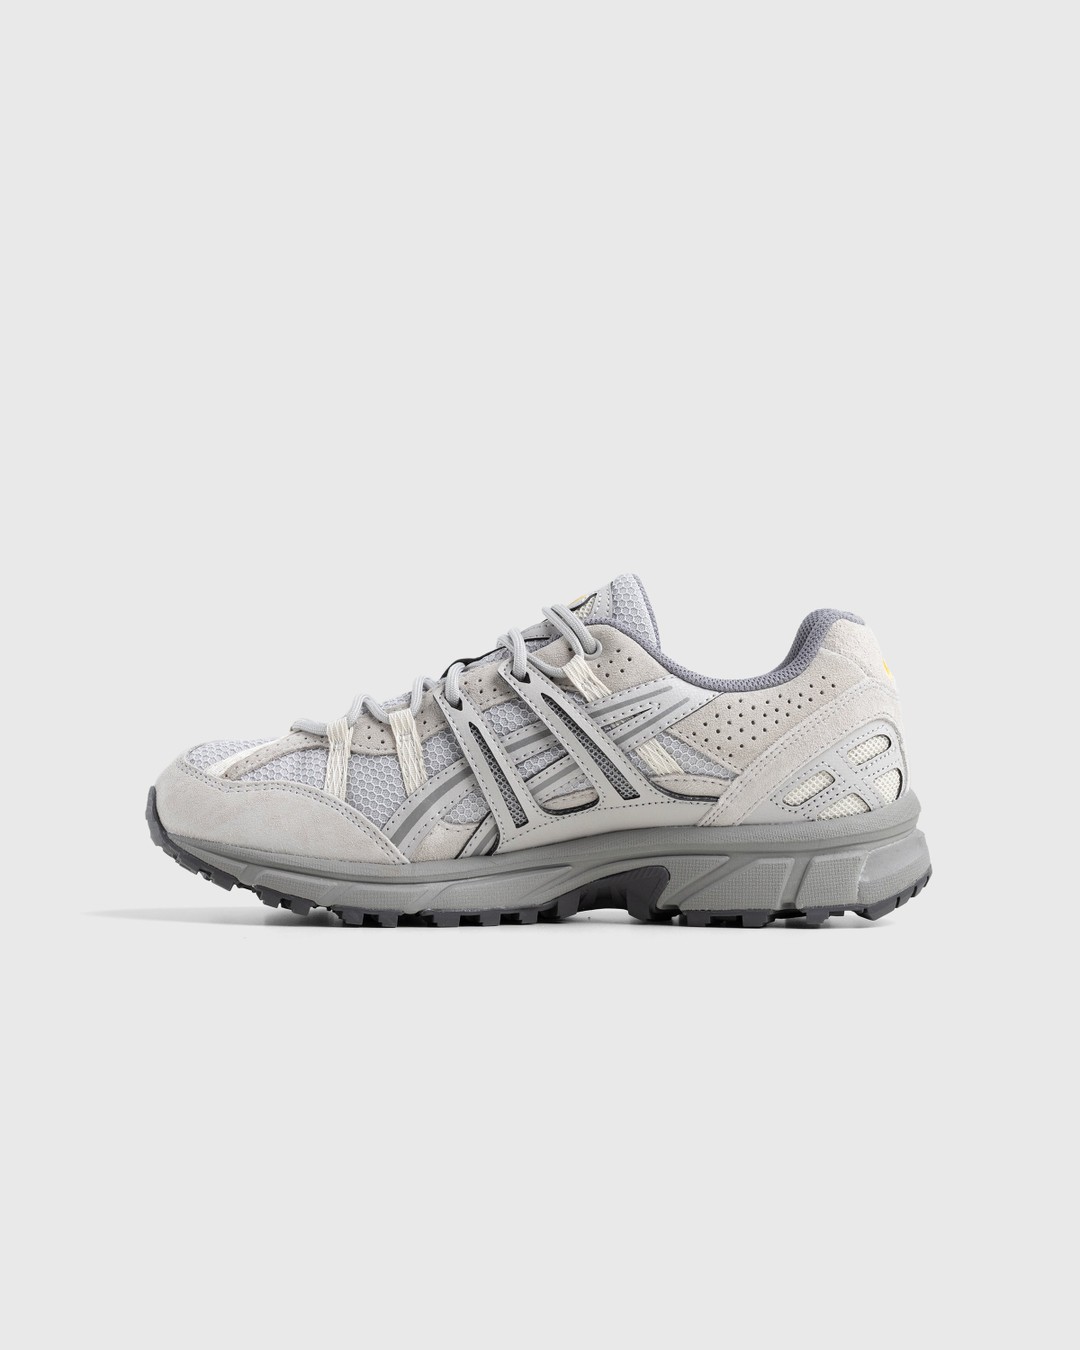 asics – Gel-Sonoma 15-50 Oyster Grey/Clay Grey - Sneakers - Grey - Image 2